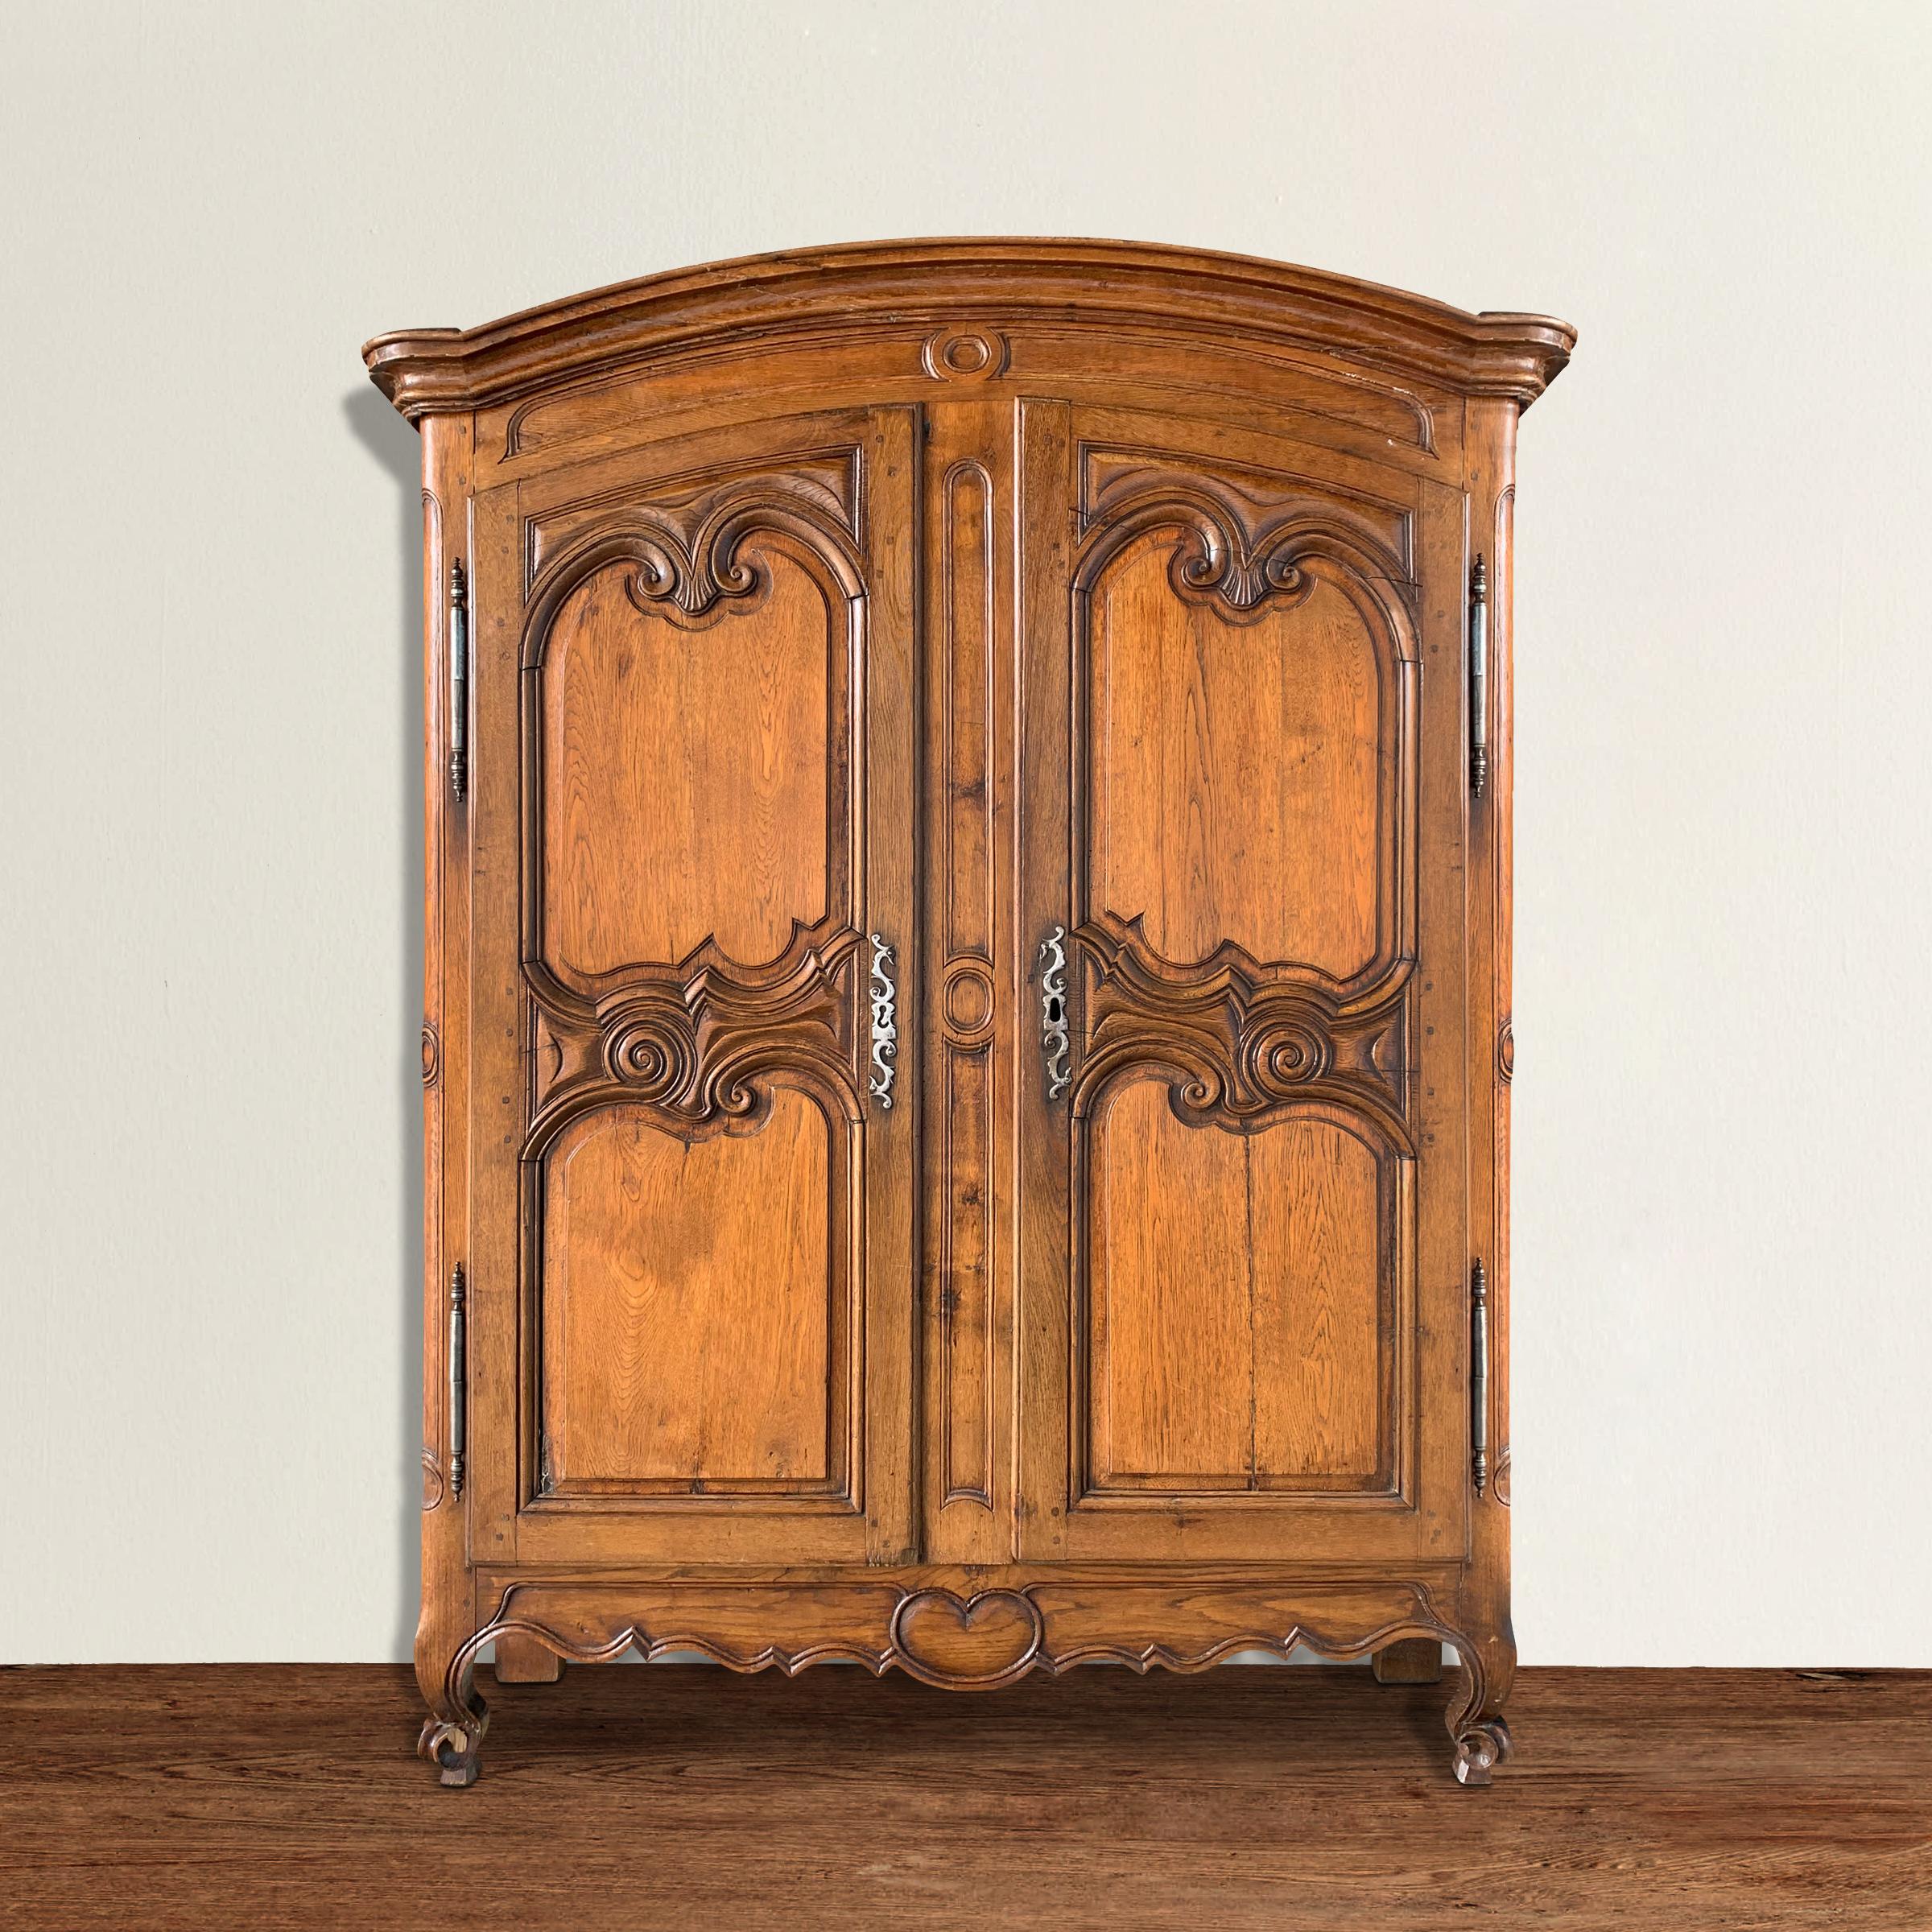 A fantastic 18th century French provincial two-door oak cabinet with wonderful sculptural carved raised panels, apron, and legs, and retaining its original rim lock and key. Cabinet is shallows which makes it perfect for use as a television and/or